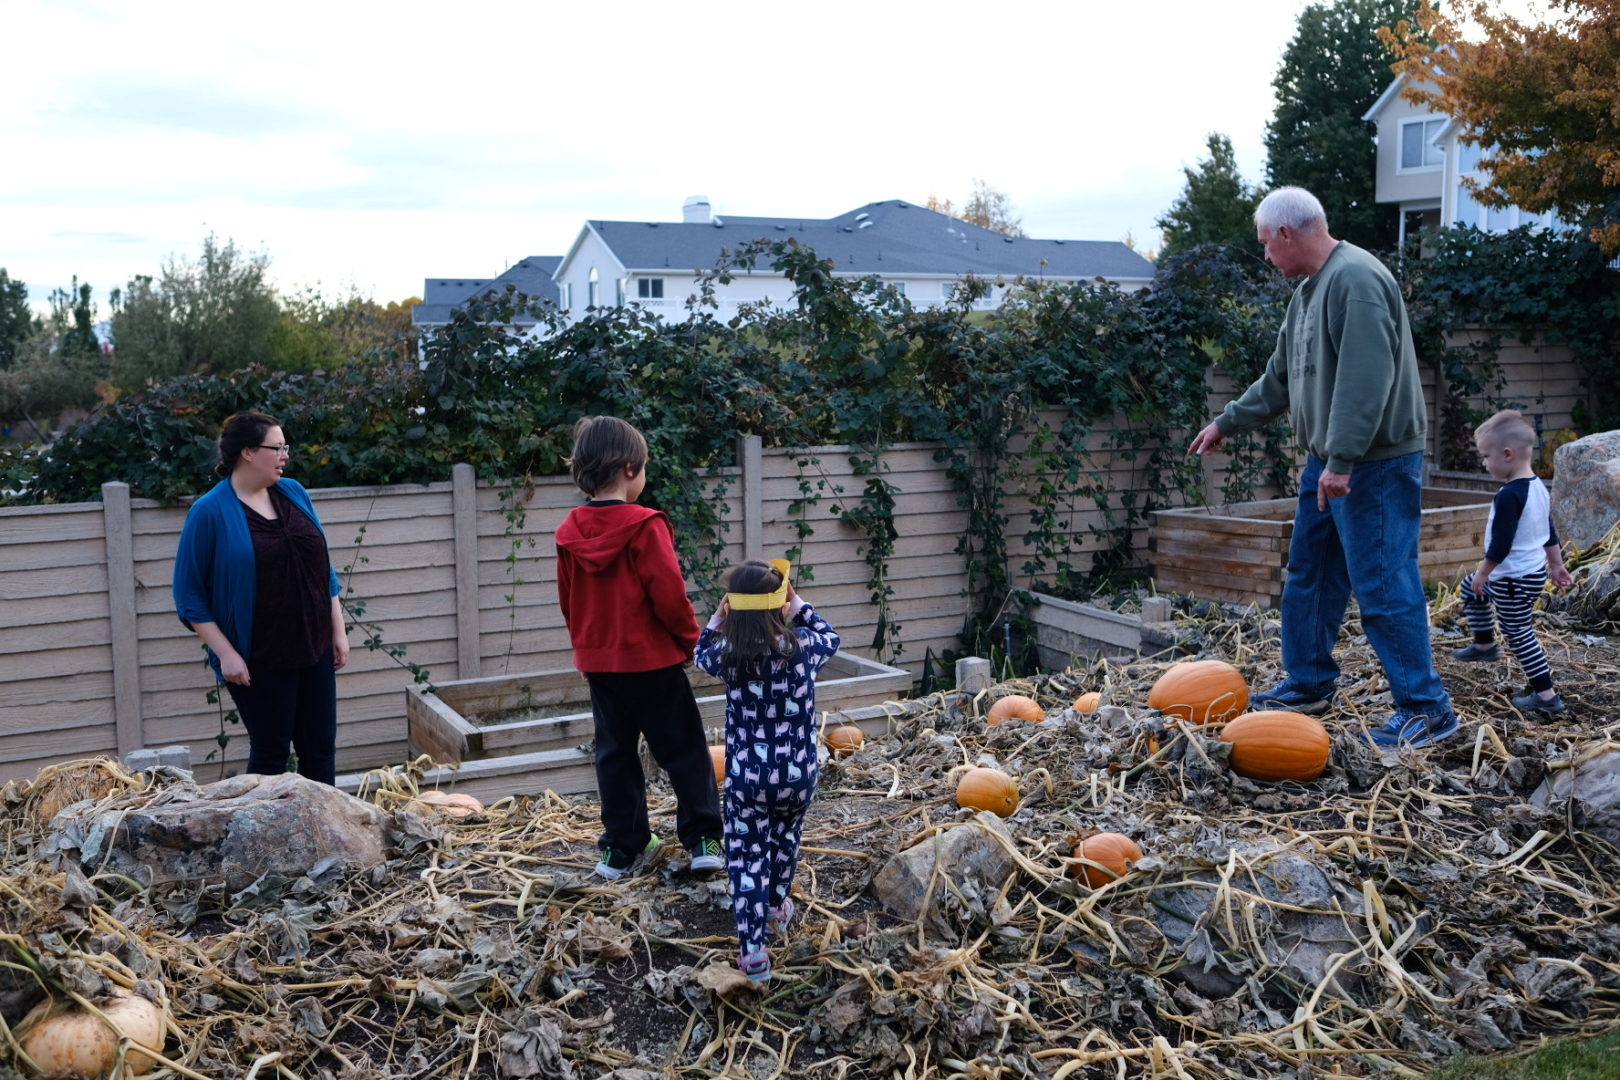 Family members look for pumpkins in a back yard pumpkin patch